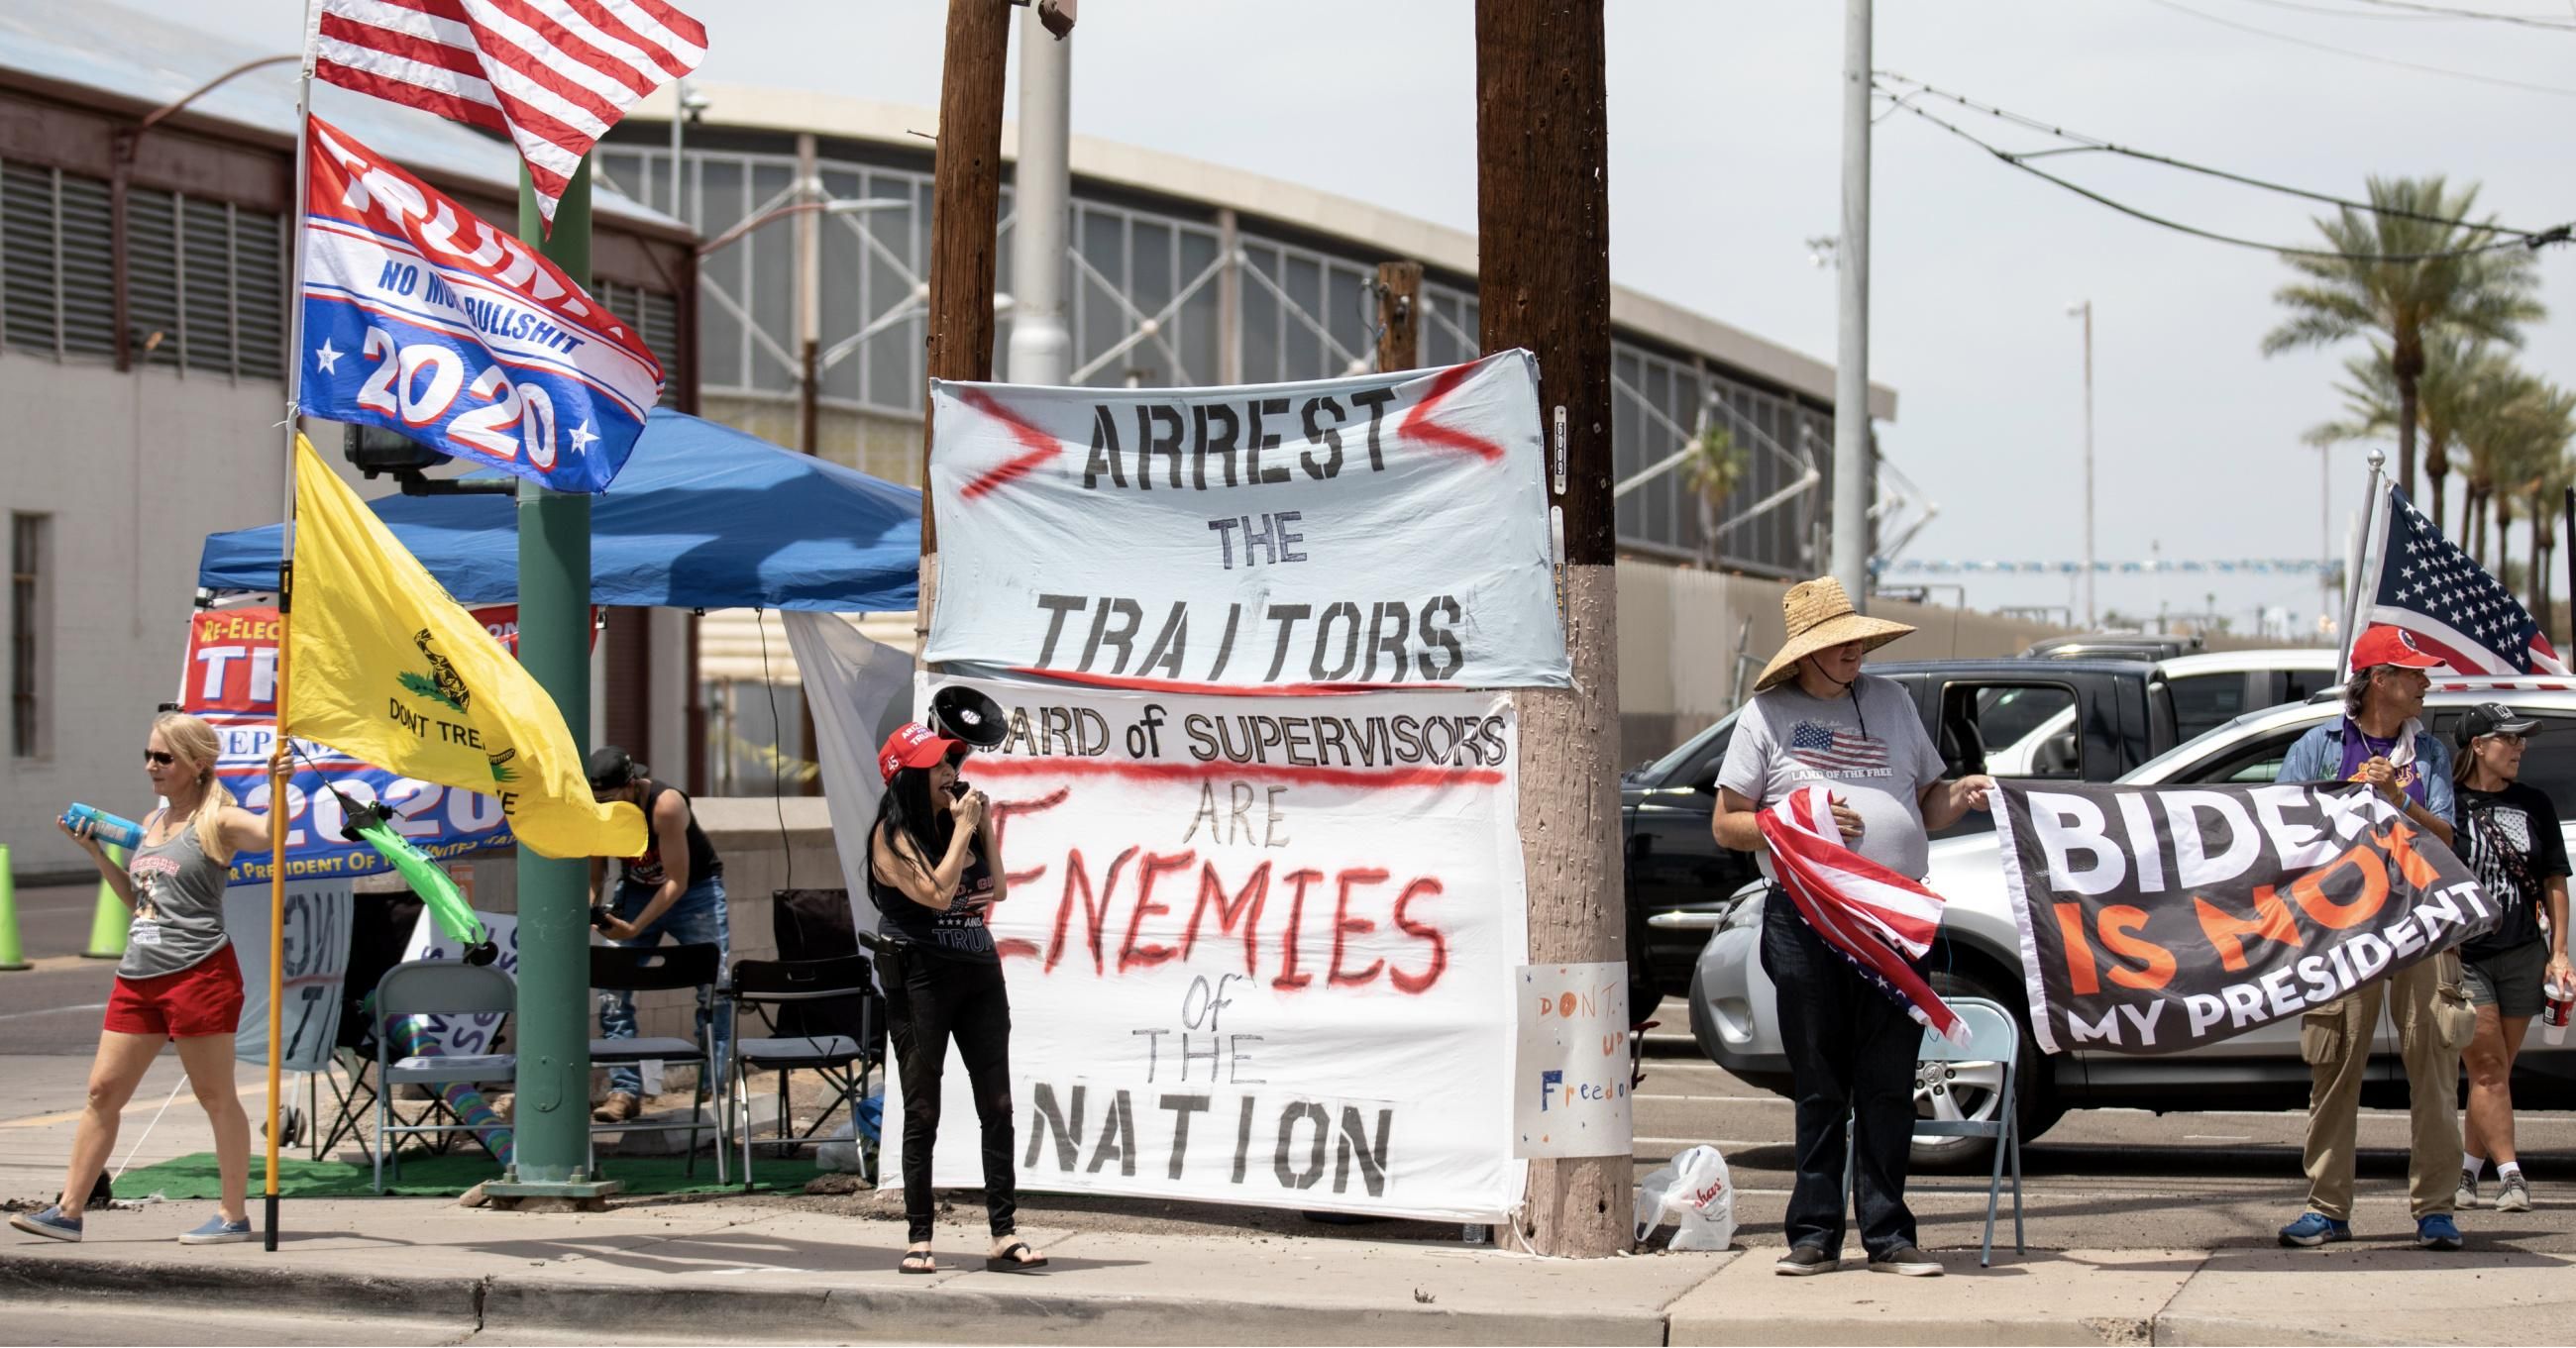 Protestors in support of former President Donald Trump gather outside Veterans Memorial Coliseum where ballots from the 2020 general election wait to be counted on May 1, 2021 in Phoenix. The Maricopa County ballot recount comes after two election audits found no evidence of widespread fraud in Arizona. (Photo: Courtney Pedroza/Getty Images)